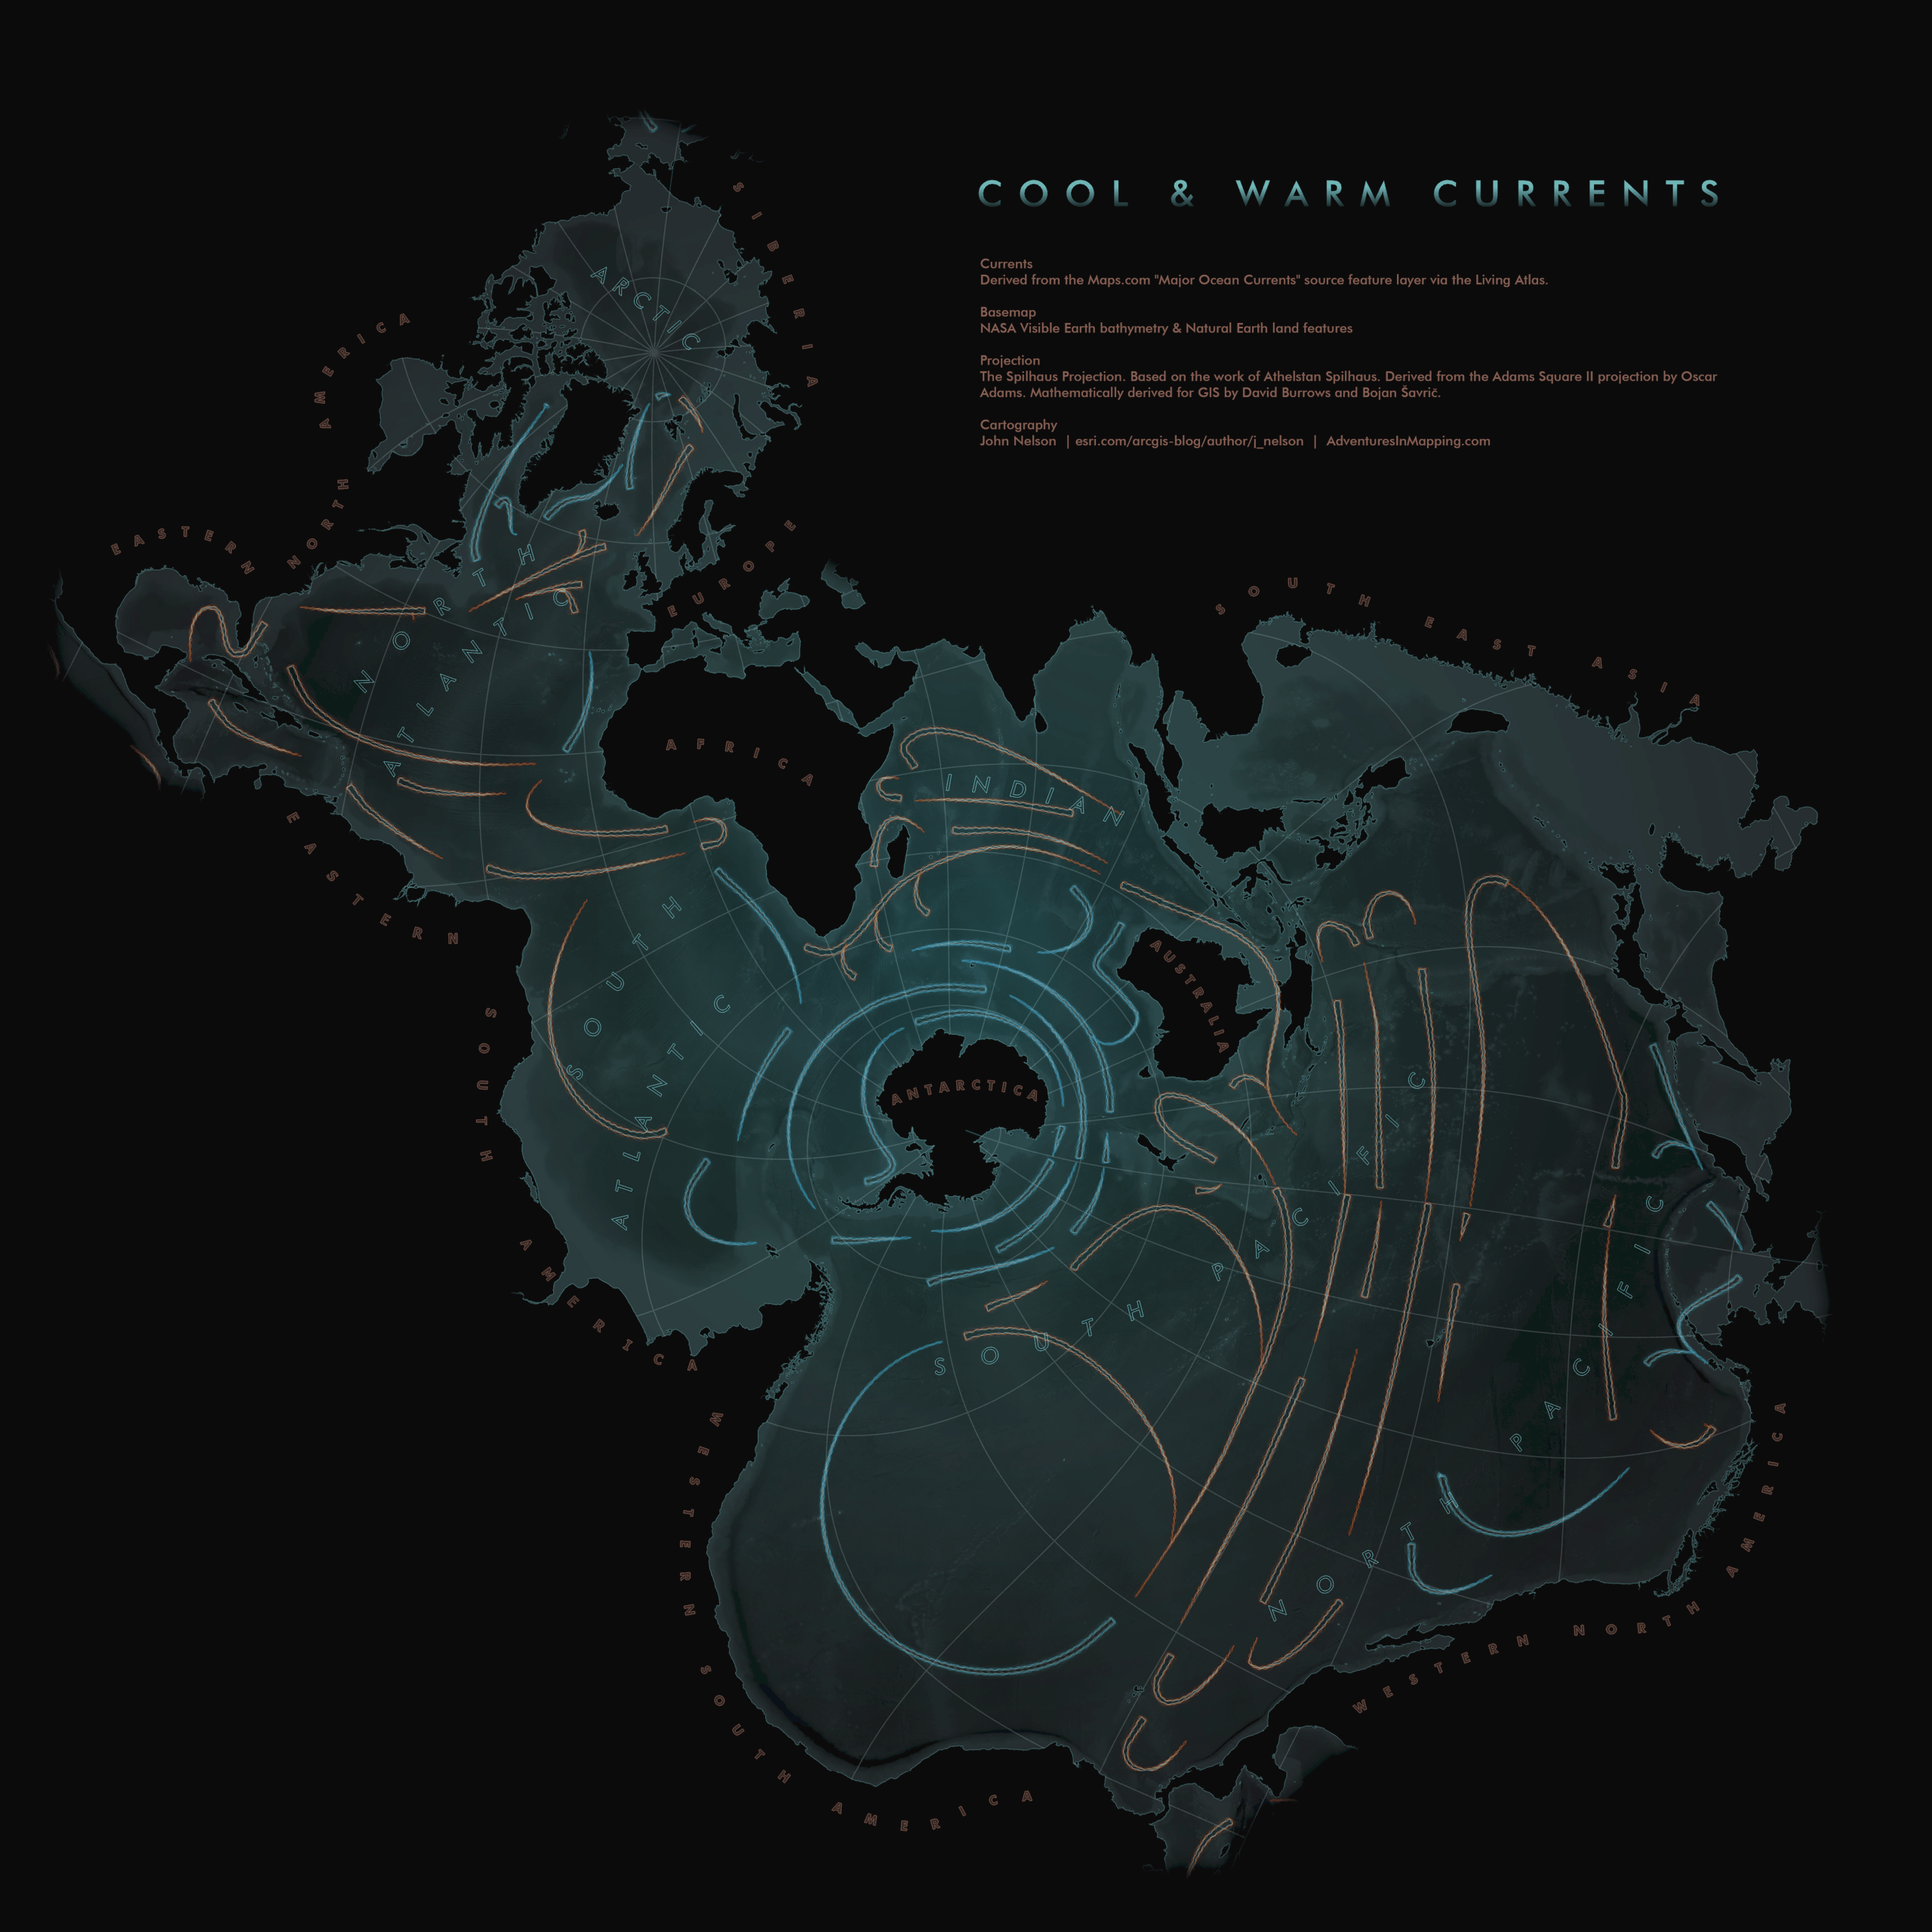 Spilhaus map of cool and warm currents